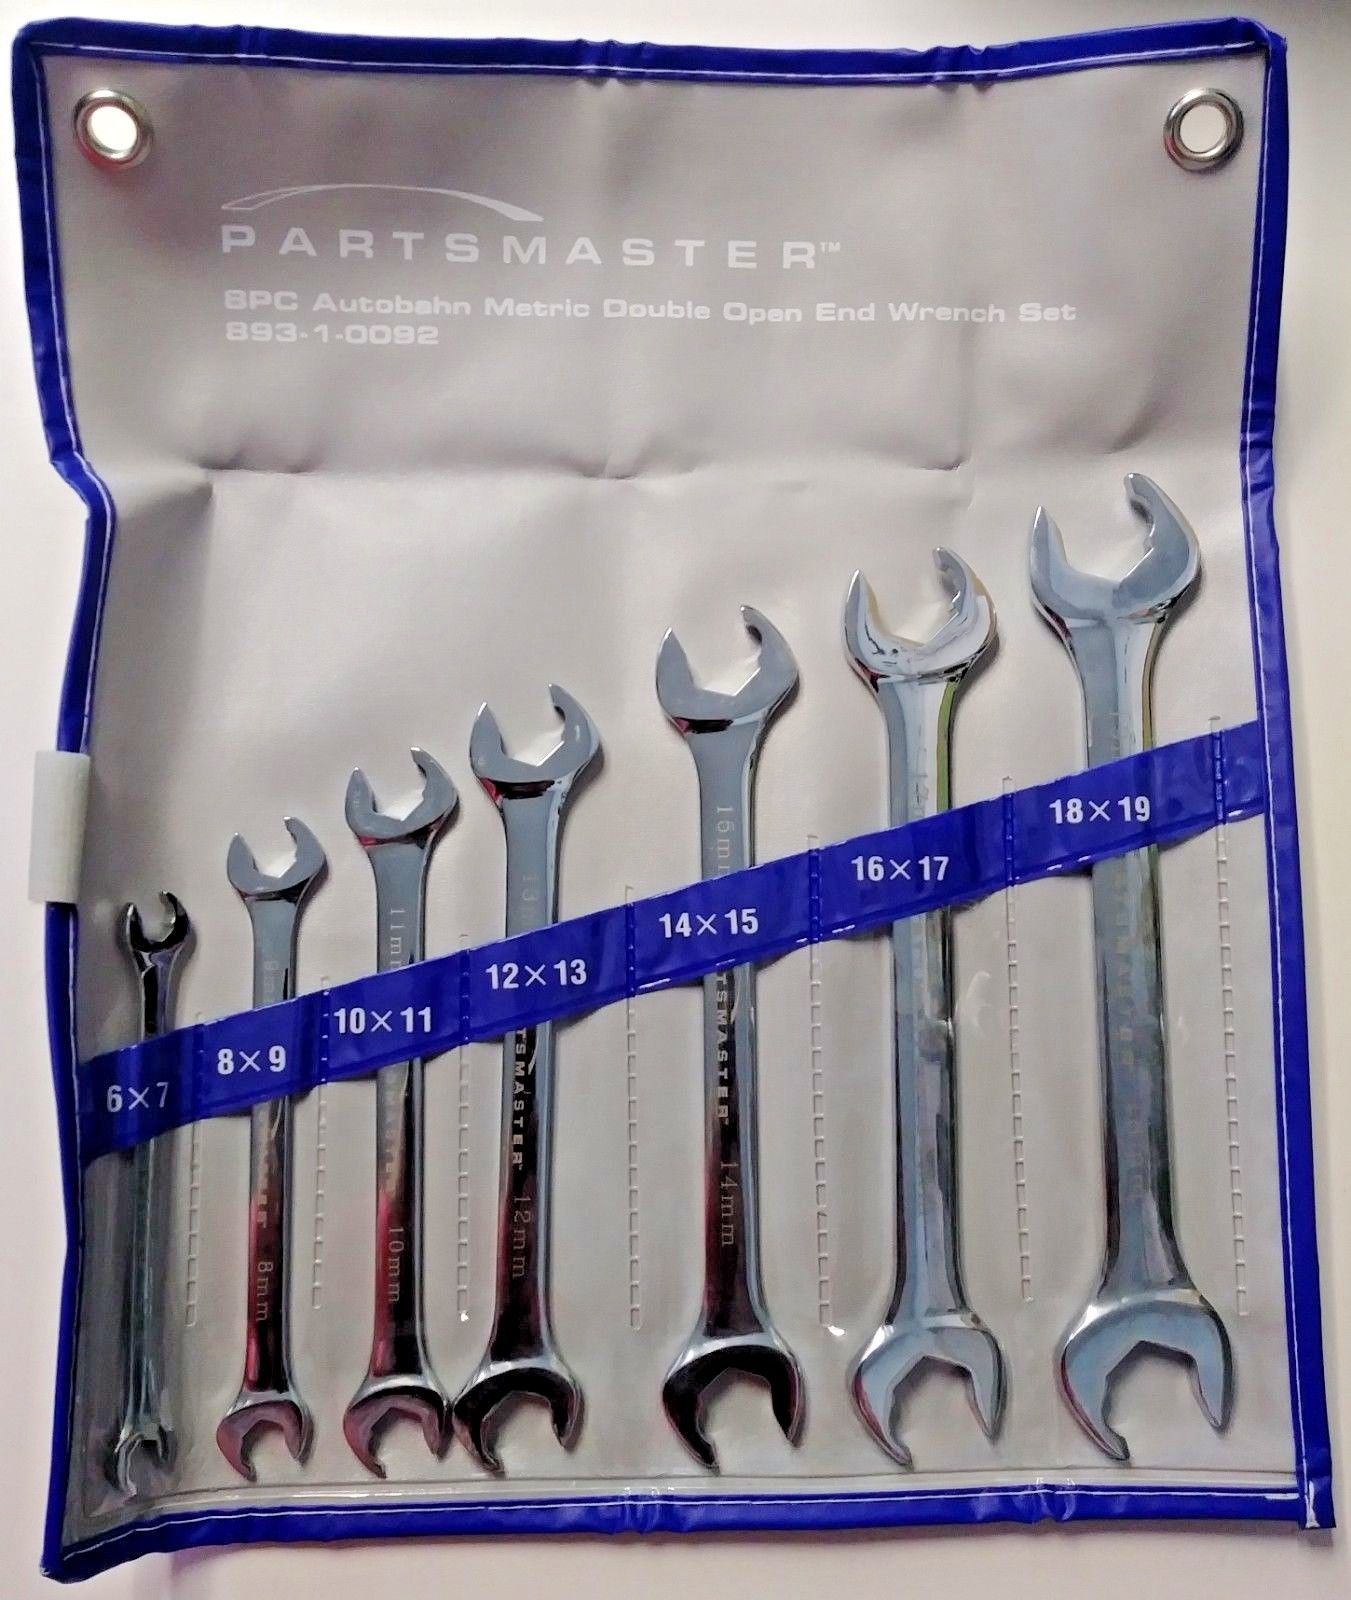 Partsmaster 893-1-0092 8 Piece Autobahn Metric Double Open-Ended Wrench Set